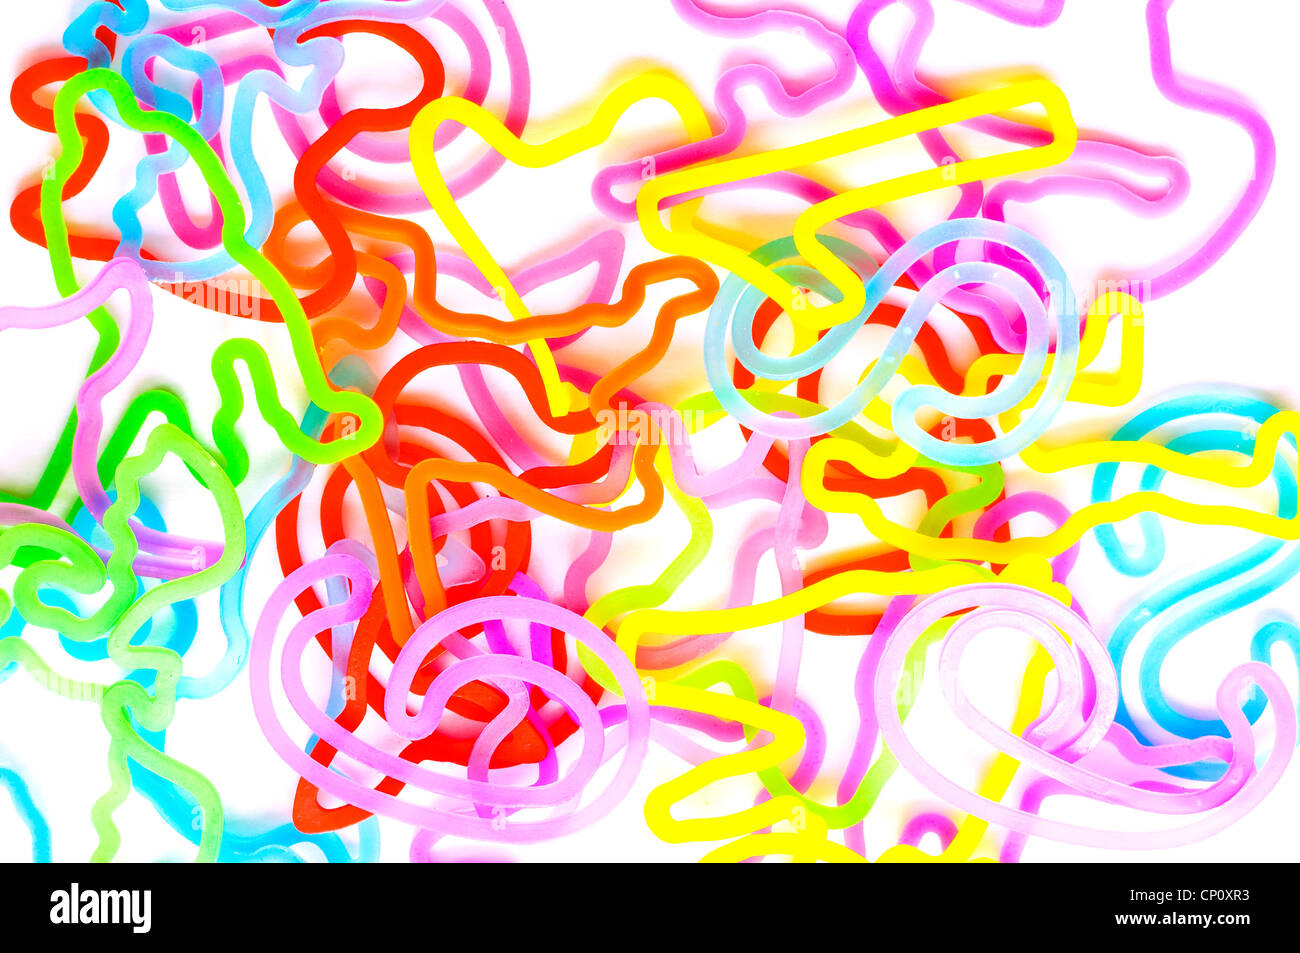 Collection of Silly bandz - colored rubber silicone bands with different shapes on white background Stock Photo